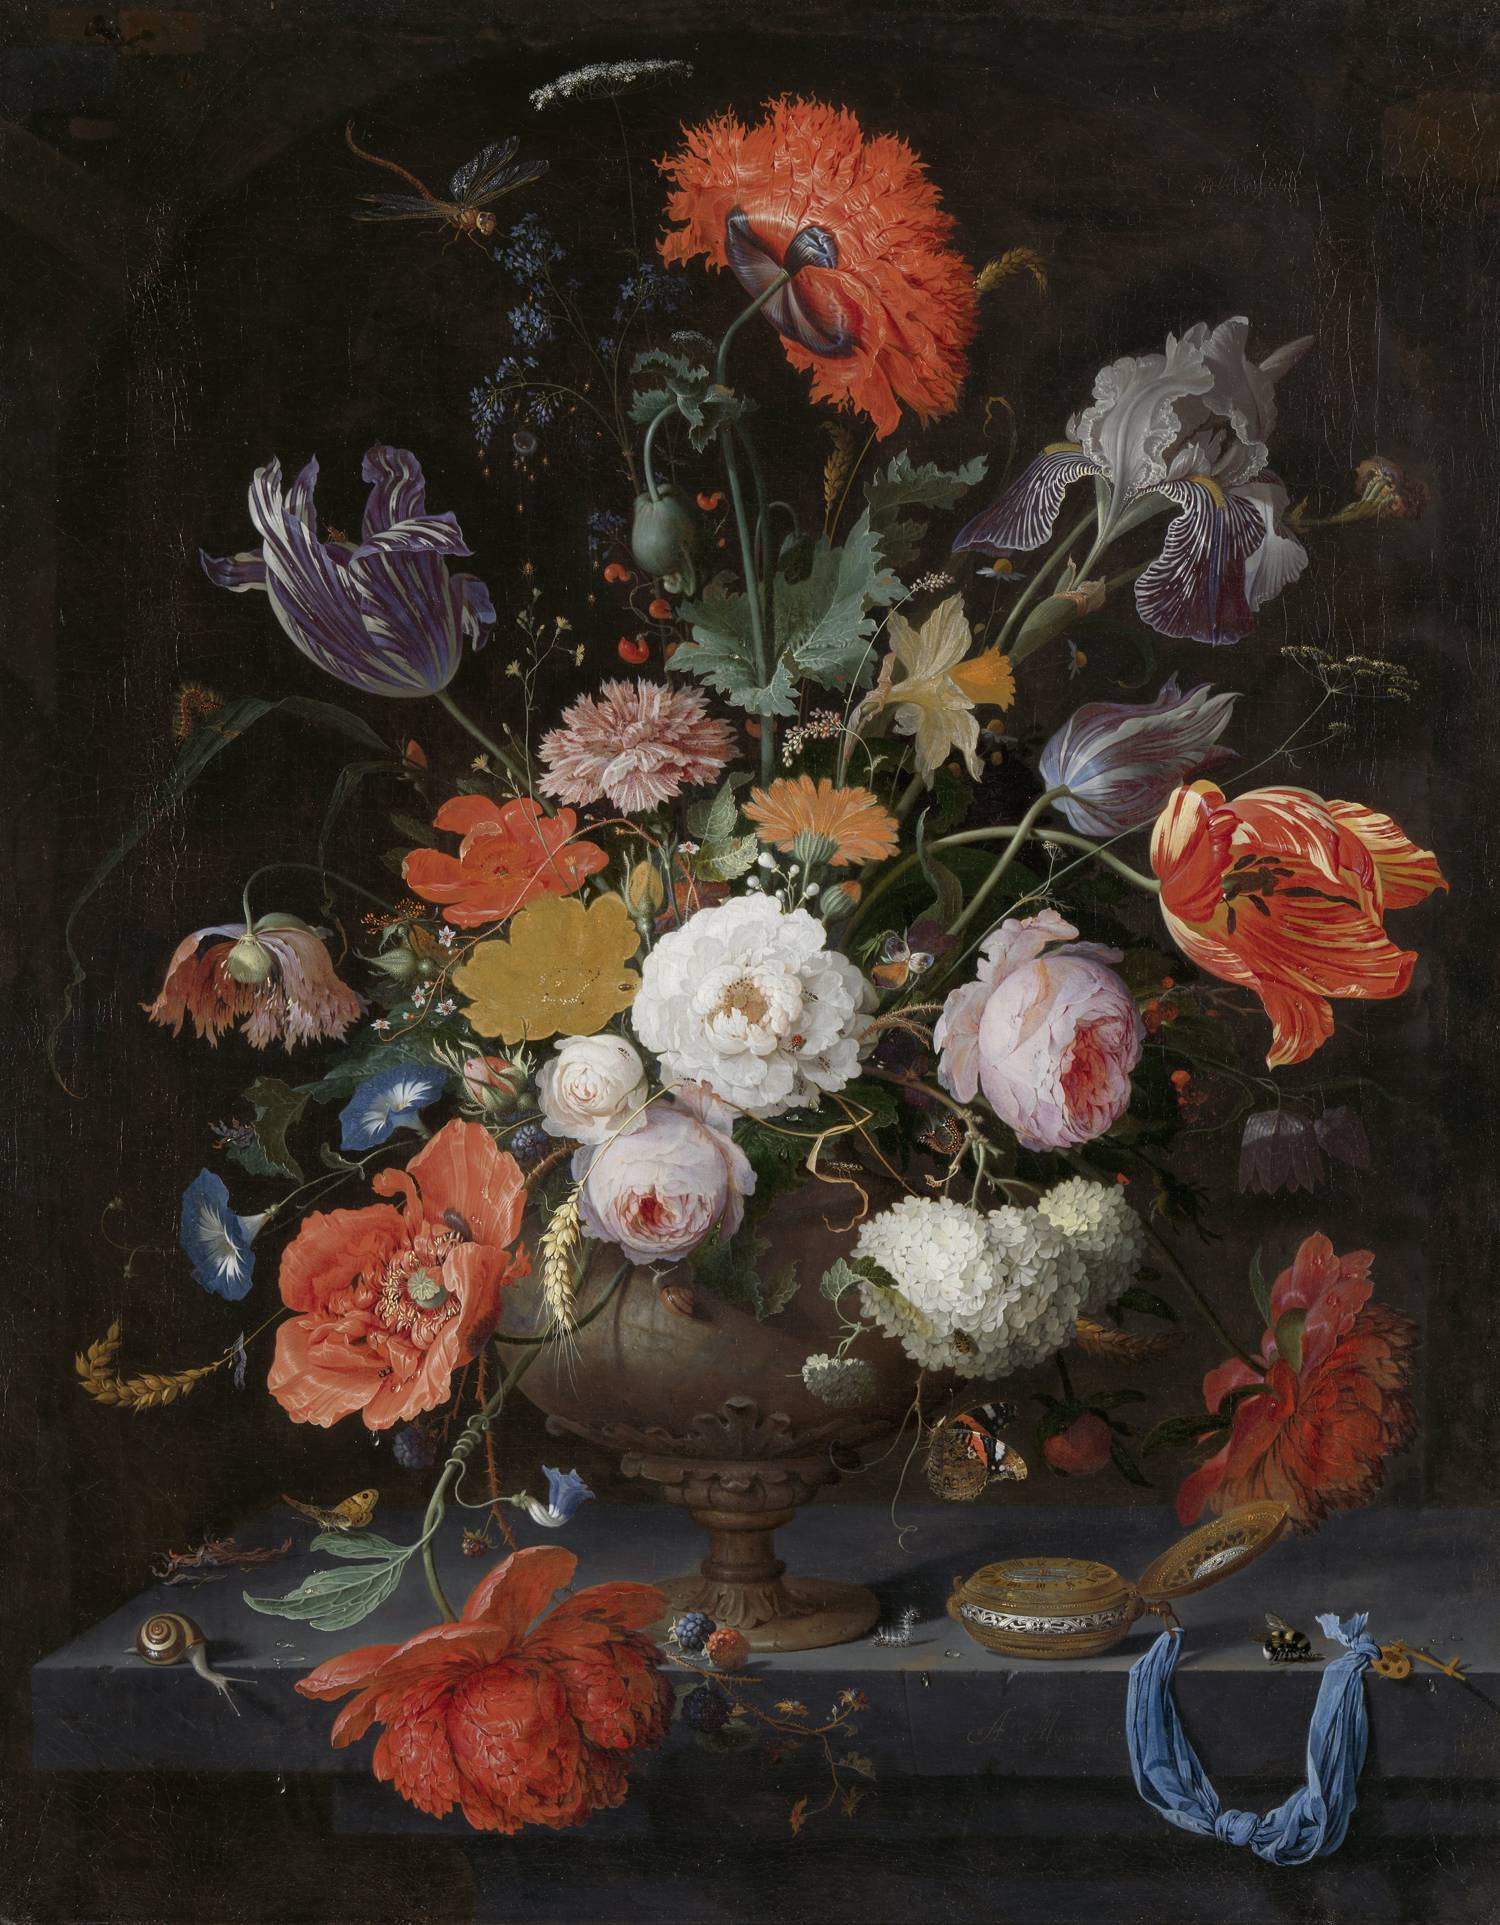 https://www.notion.so/images/page-cover/rijksmuseum_mignons_1660.jpg